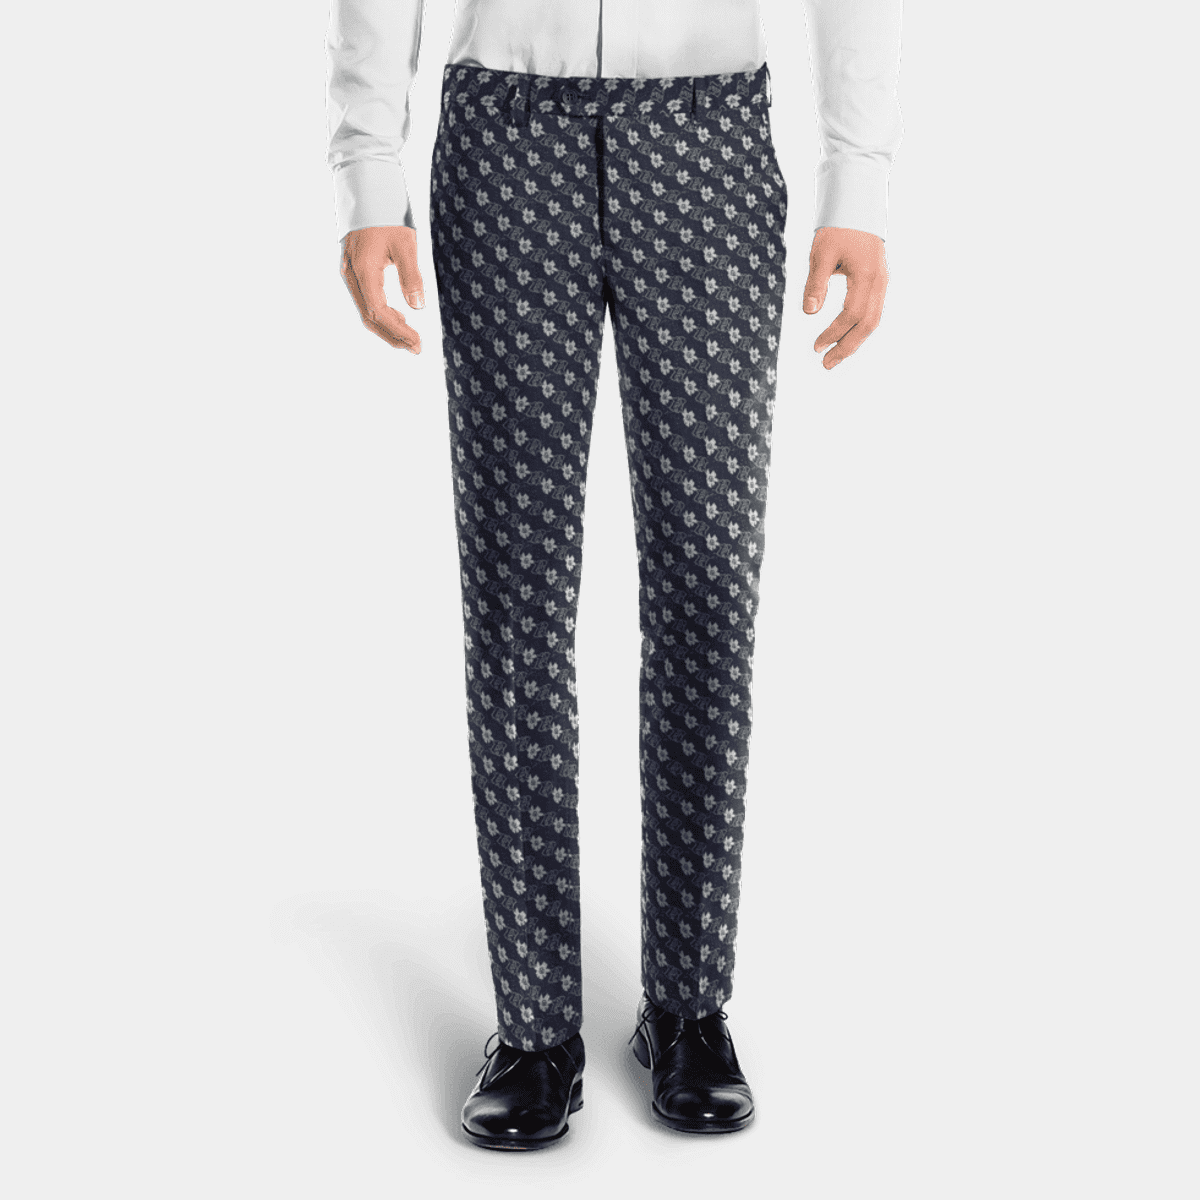 AIME LEON DORE Men's Mineral Red Polka Dot Trousers Size XS $350 NWT – Walk  Into Fashion